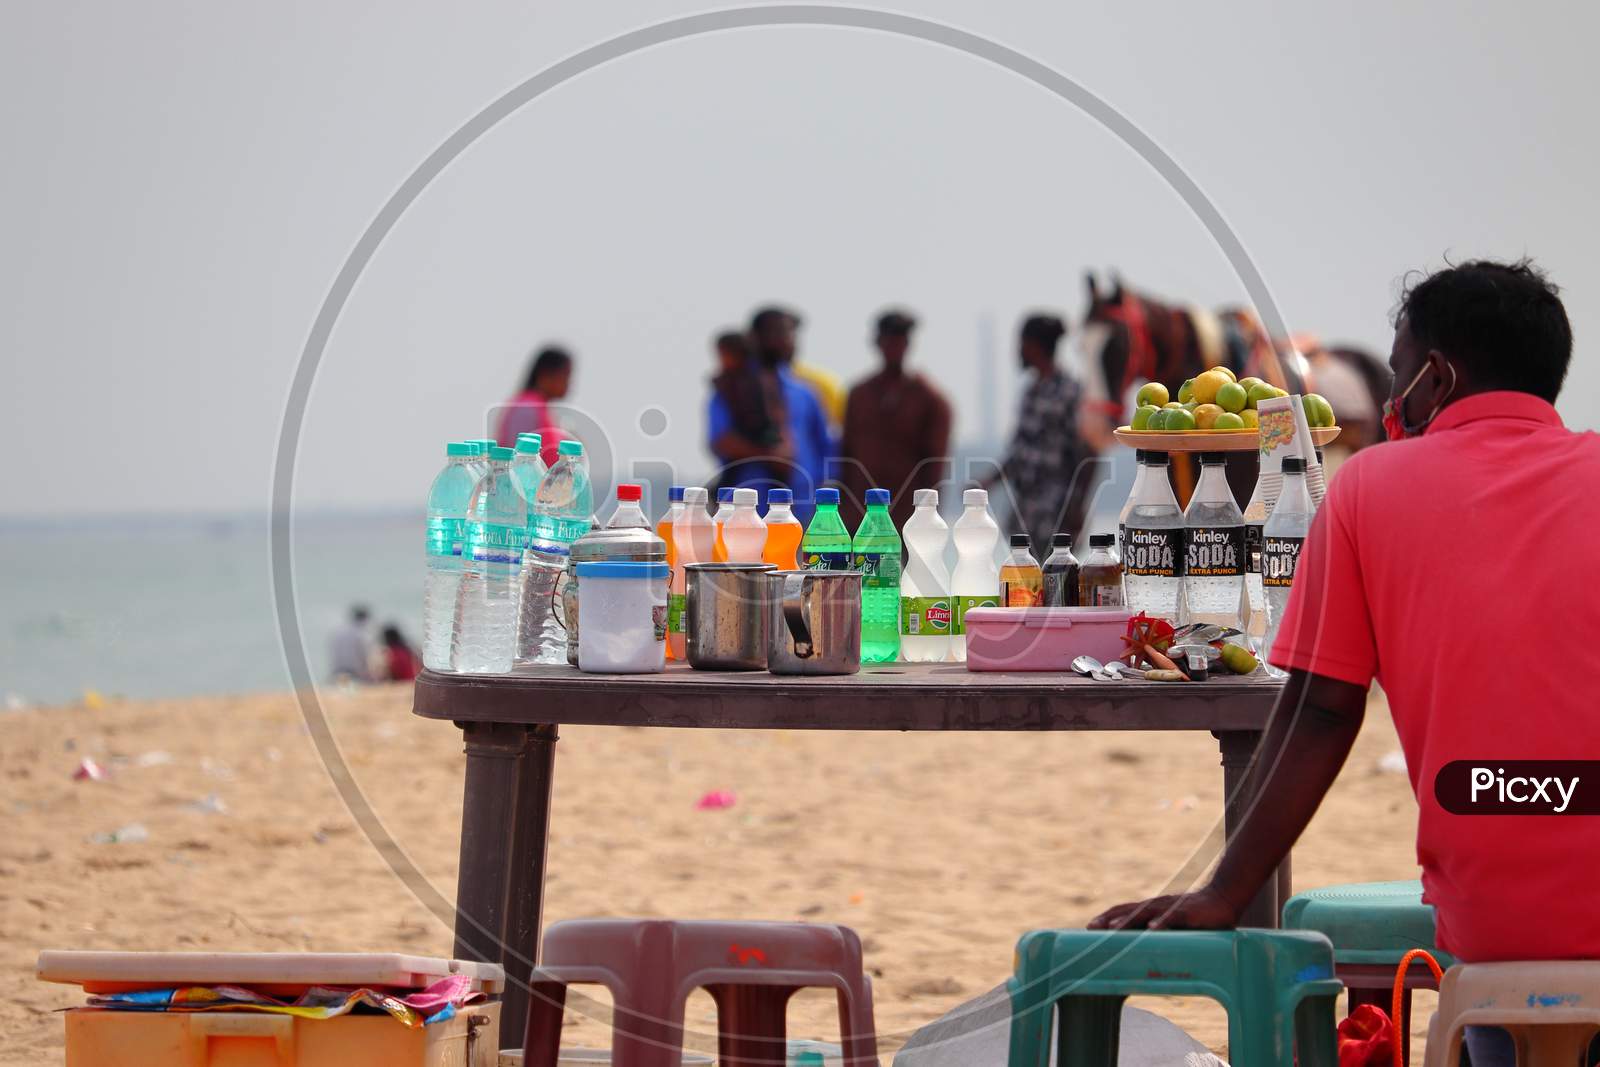 On The Beach, A Shopkeeper Shops And Sells A Product That Relieves The Heat Of The Tourists.